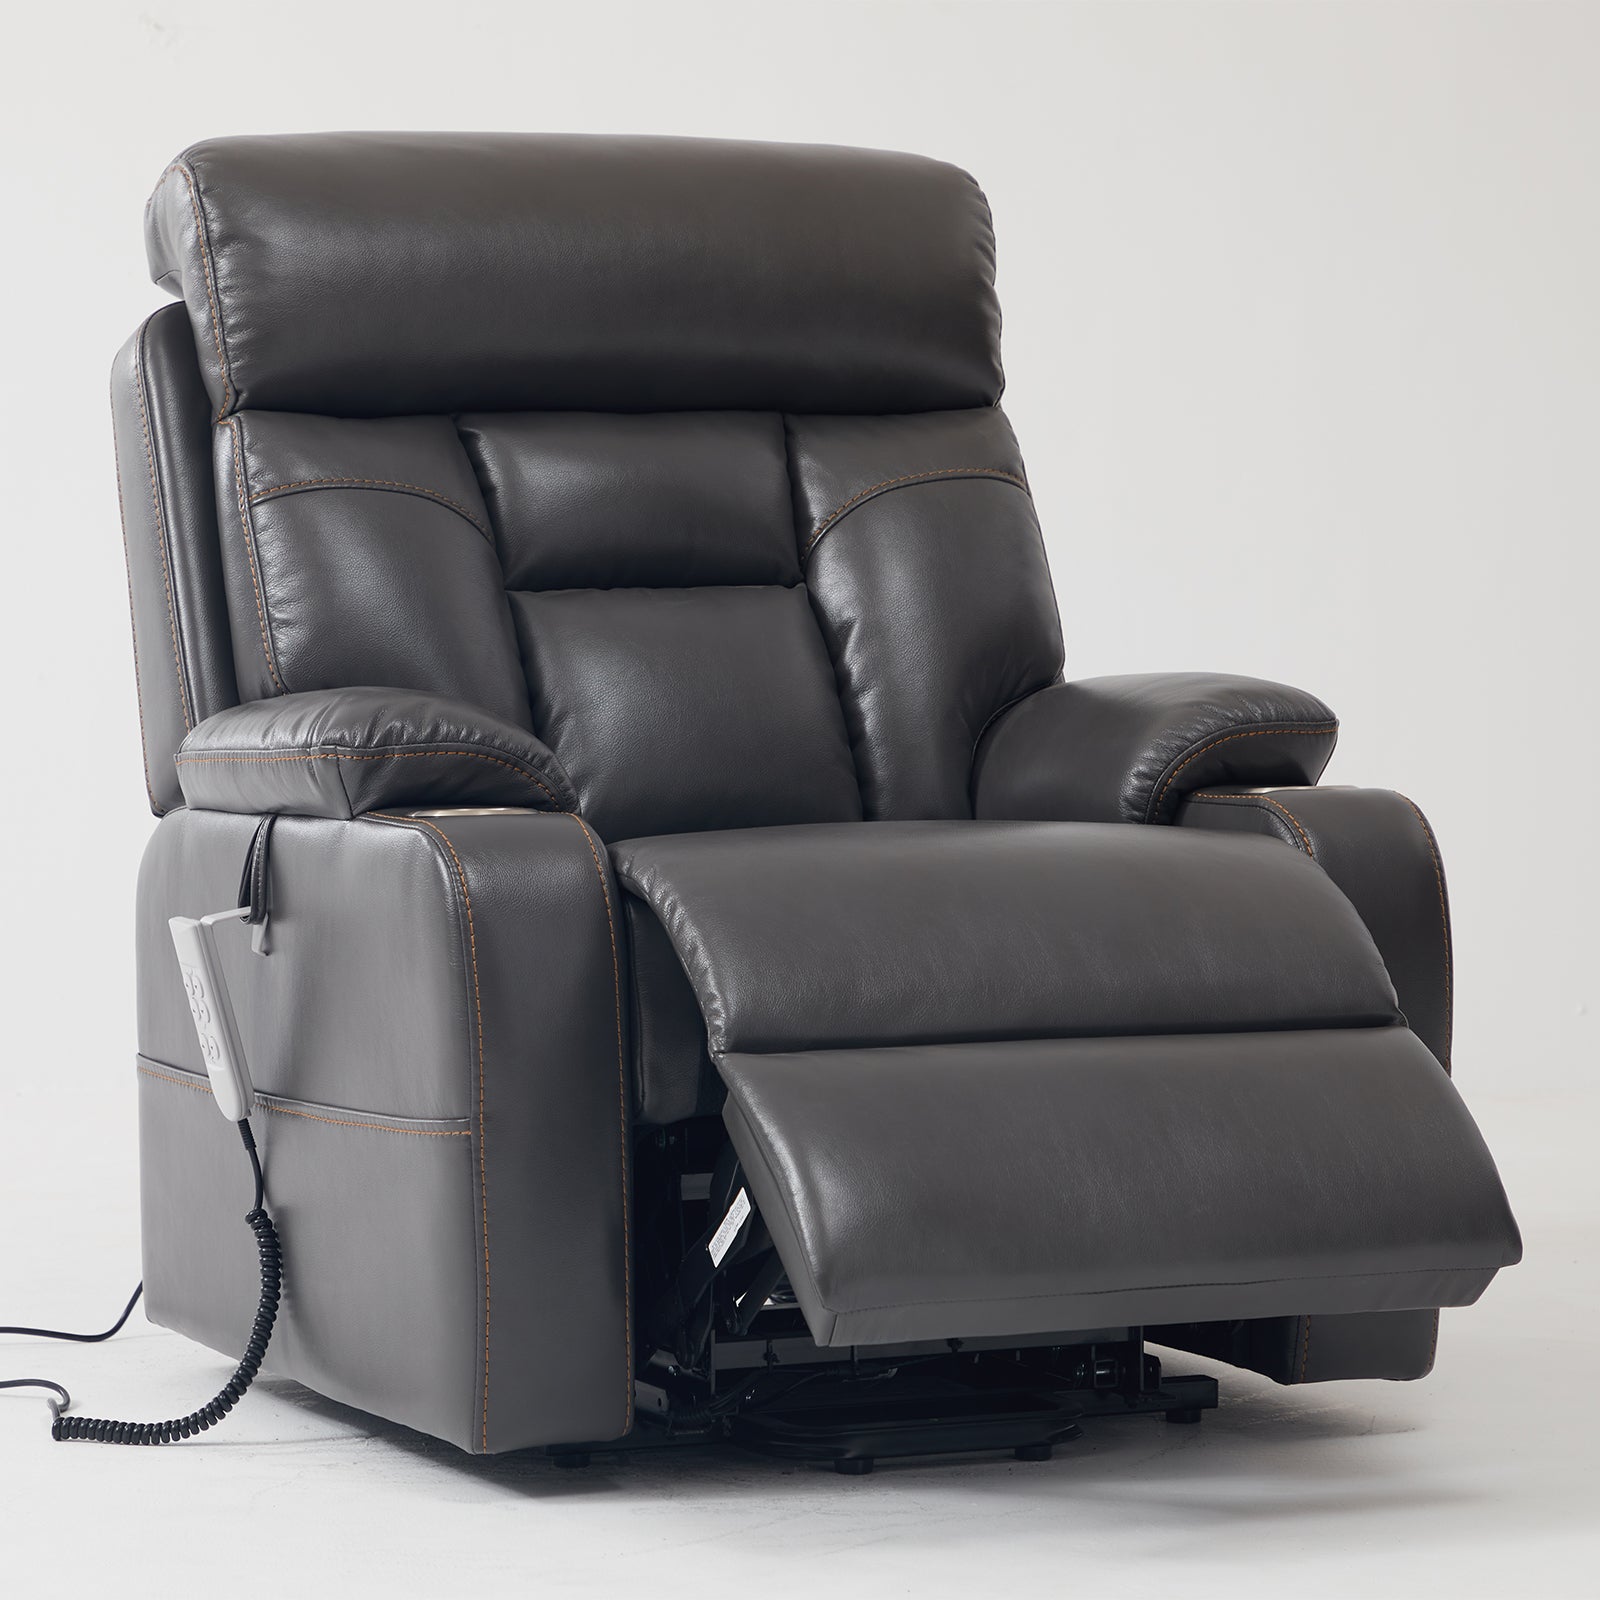 9181 Three Motor Recliner Chair With Lumbar Support(Lay Flat)